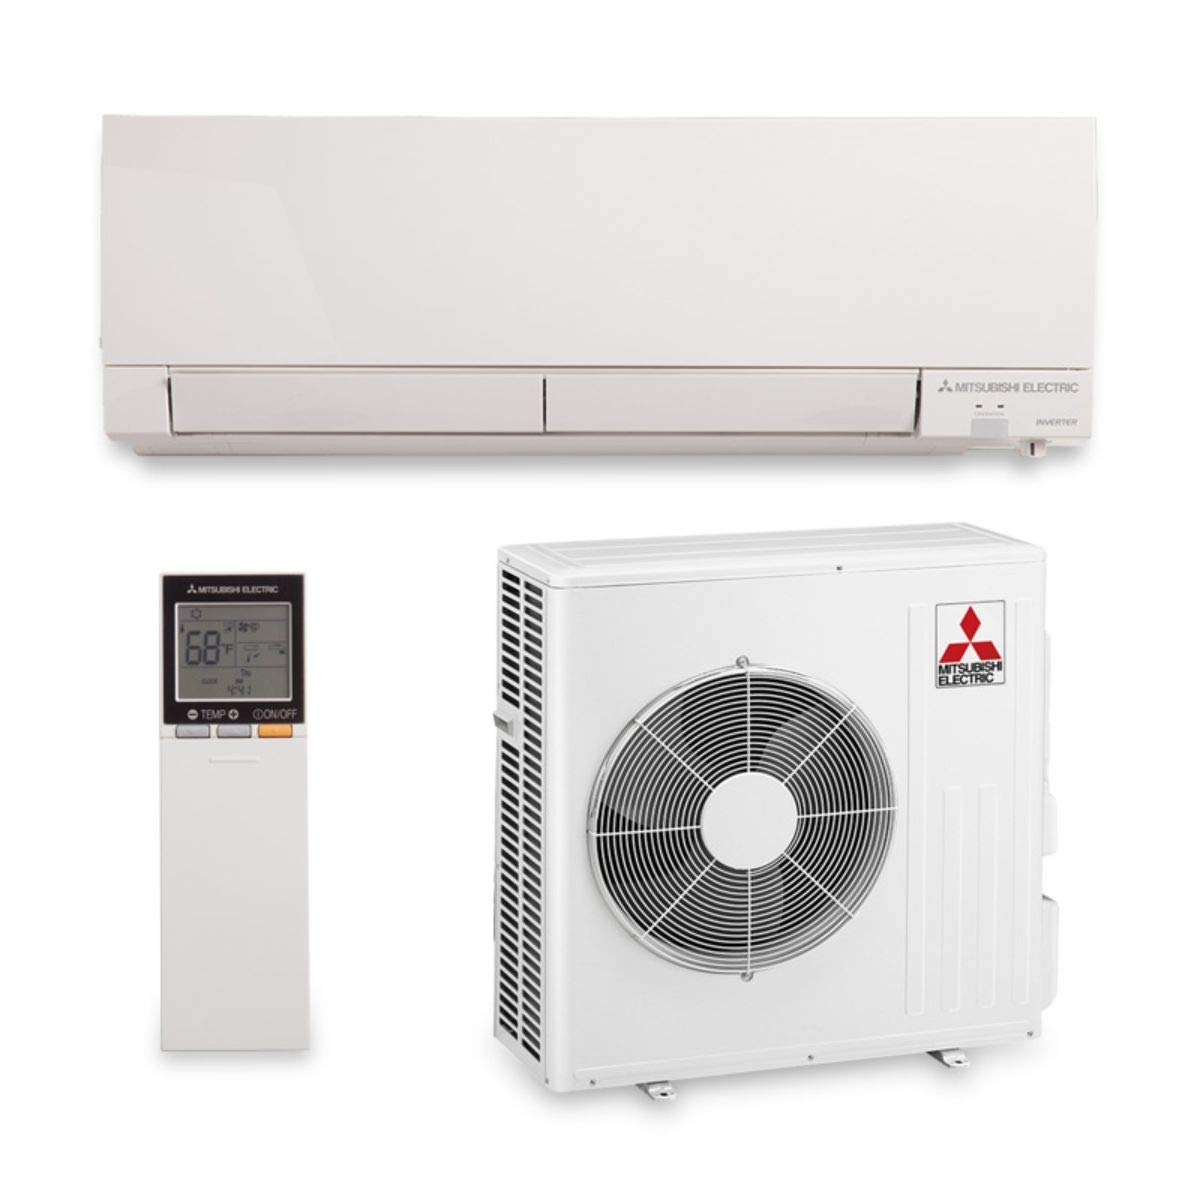 Top Rated Mitsubishi Mini Split Heat Pump Supplier and Installer NYC's Logo